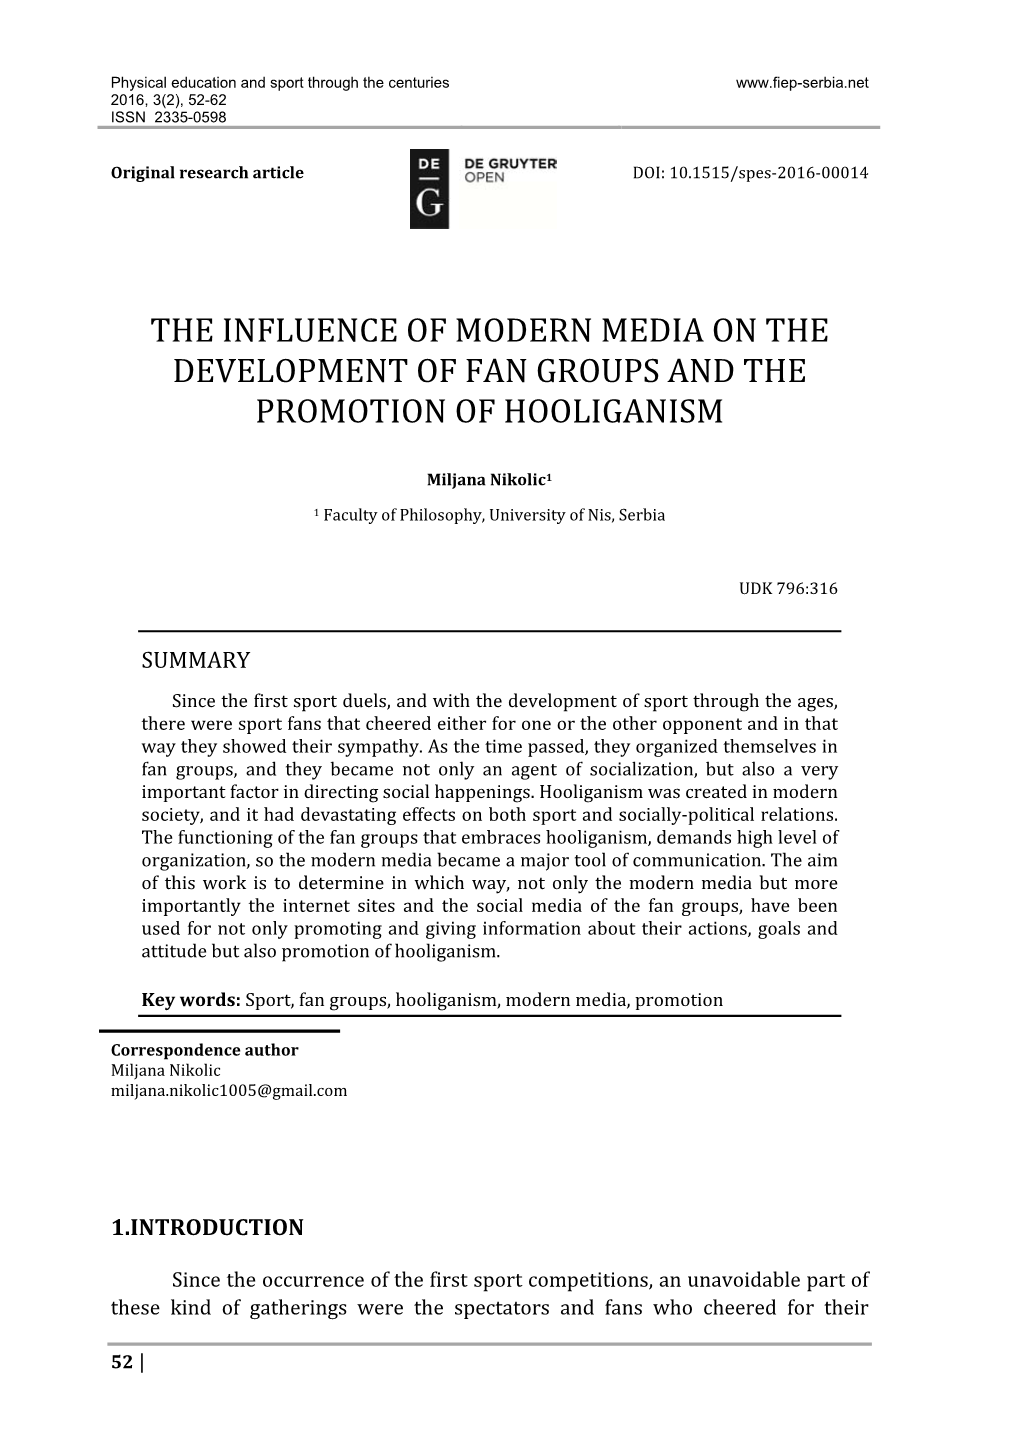 The Influence of Modern Media on the Development of Fan Groups and the Promotion of Hooliganism